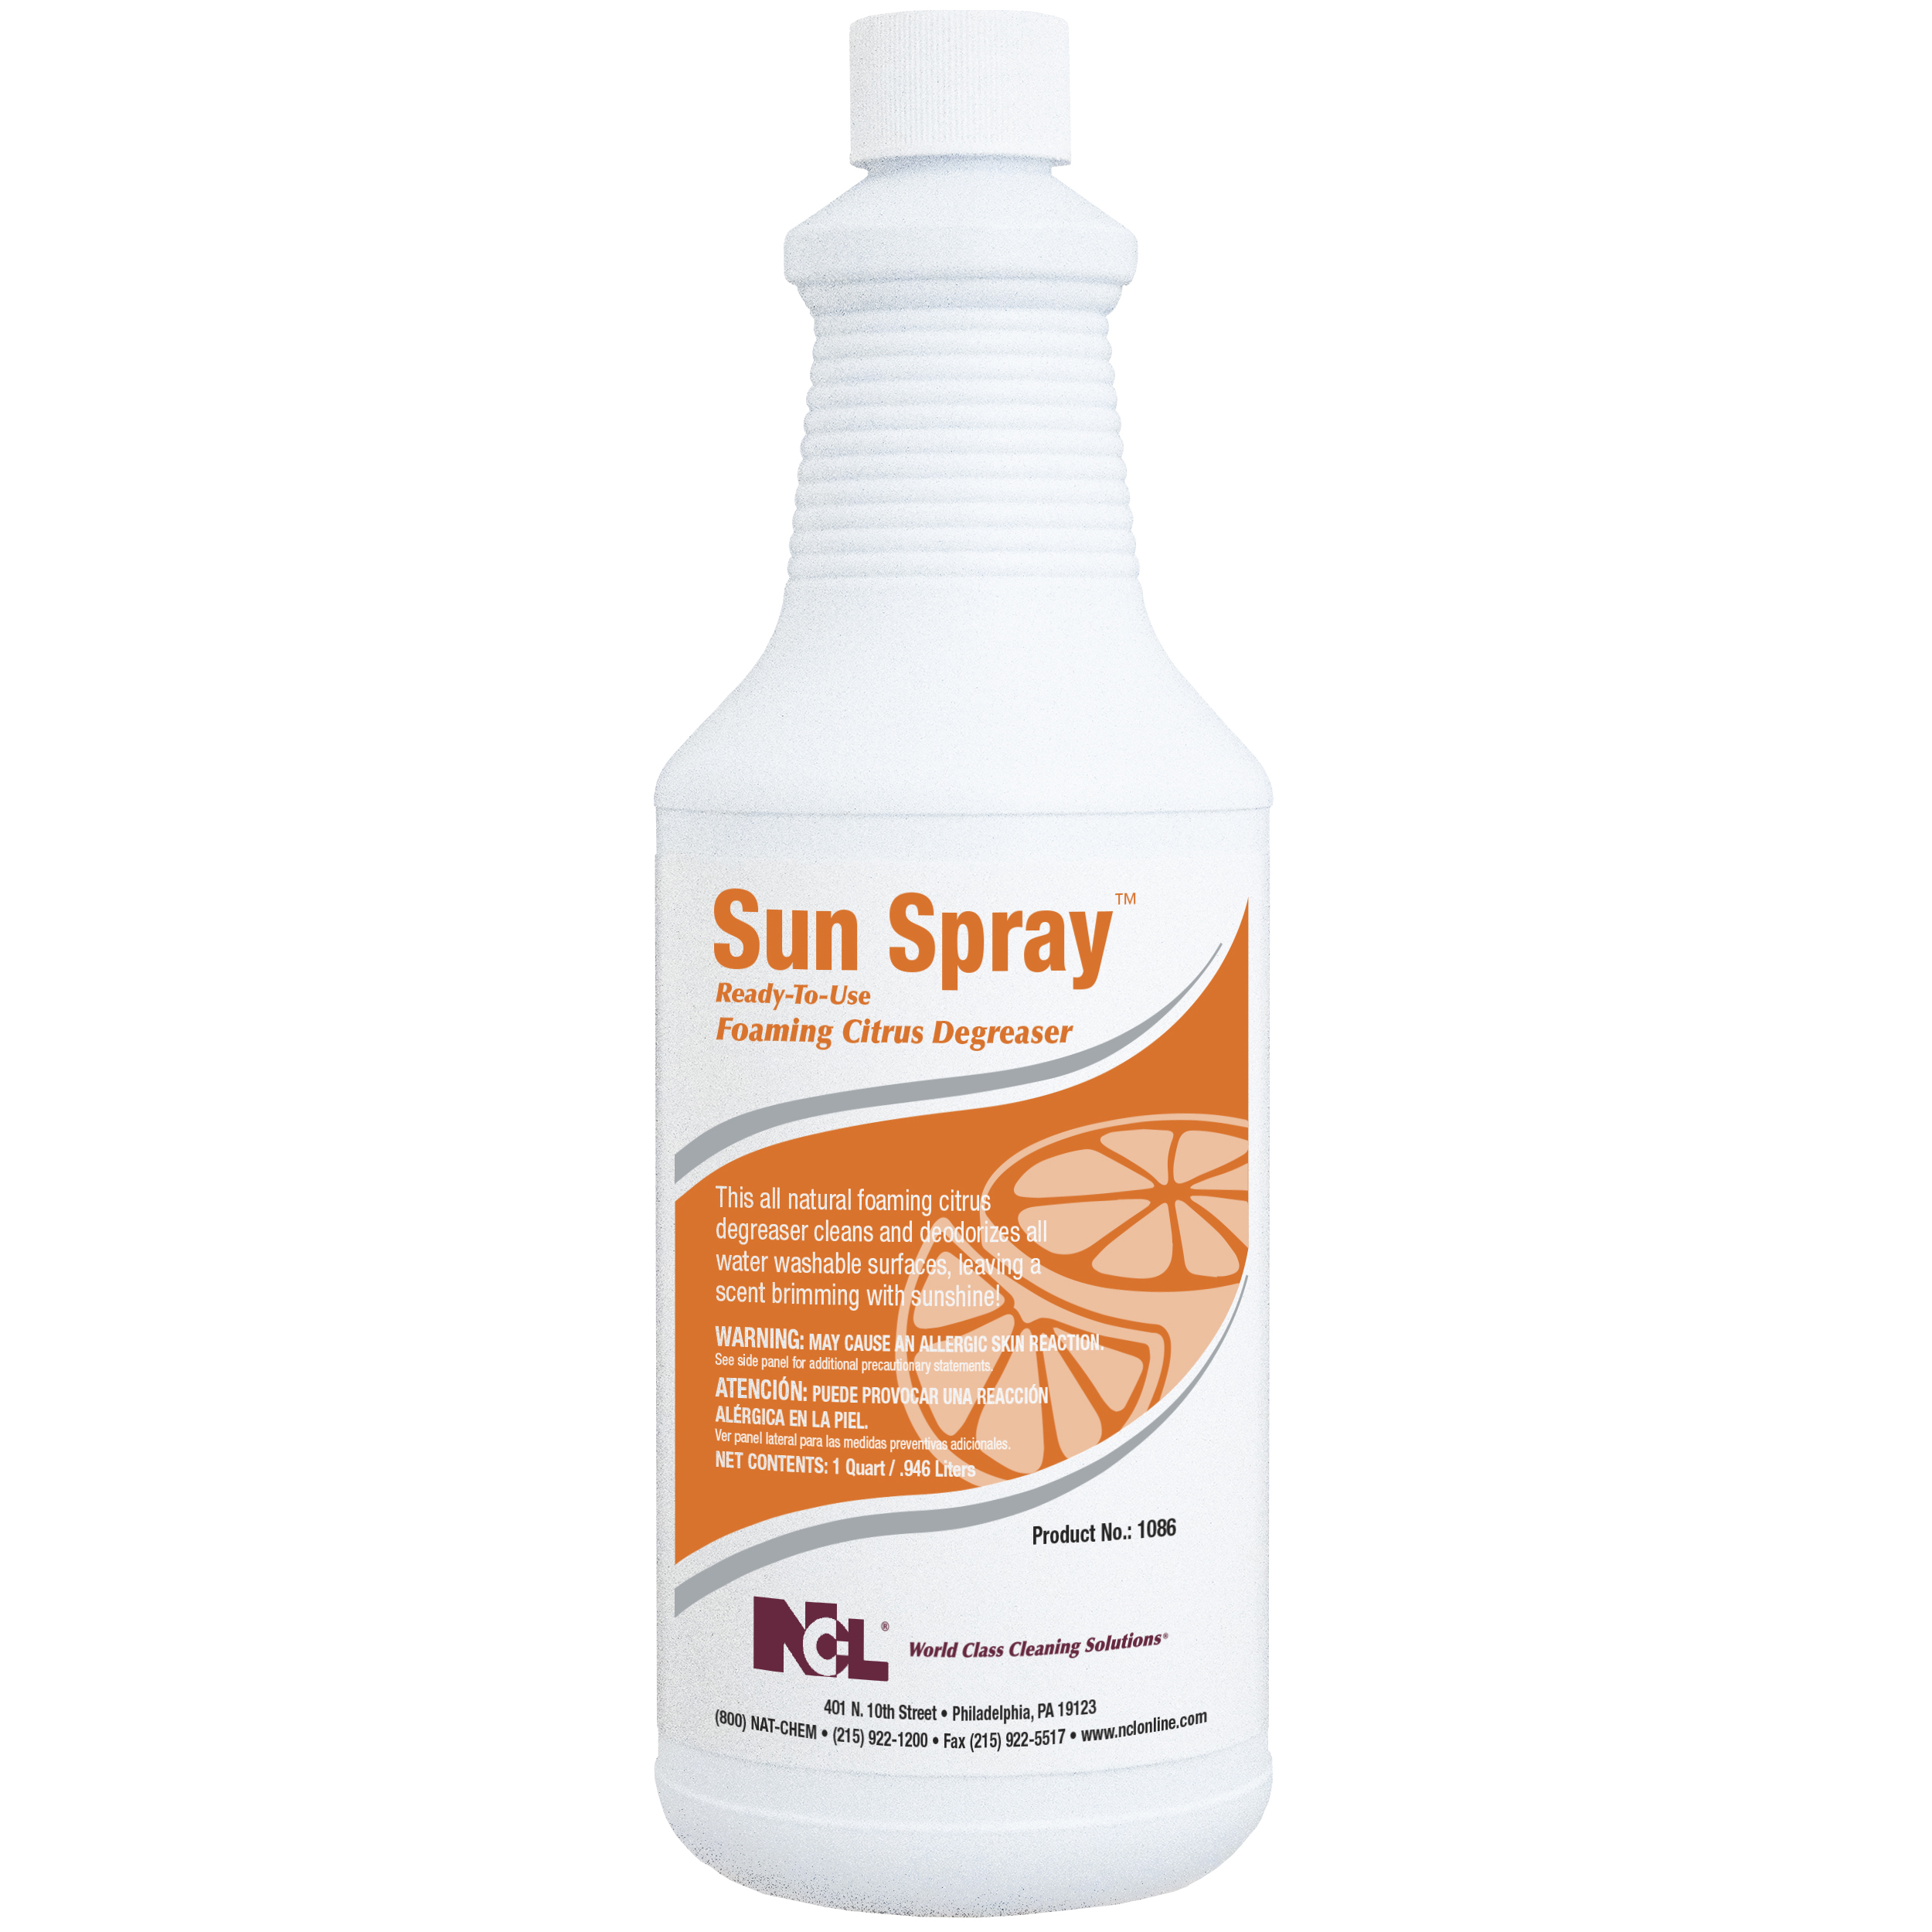  SUN SPRAY Ready-To-Use Foaming Citrus Degreaser 12/32 oz (1 Qt.) Case (NCL1086-36) 